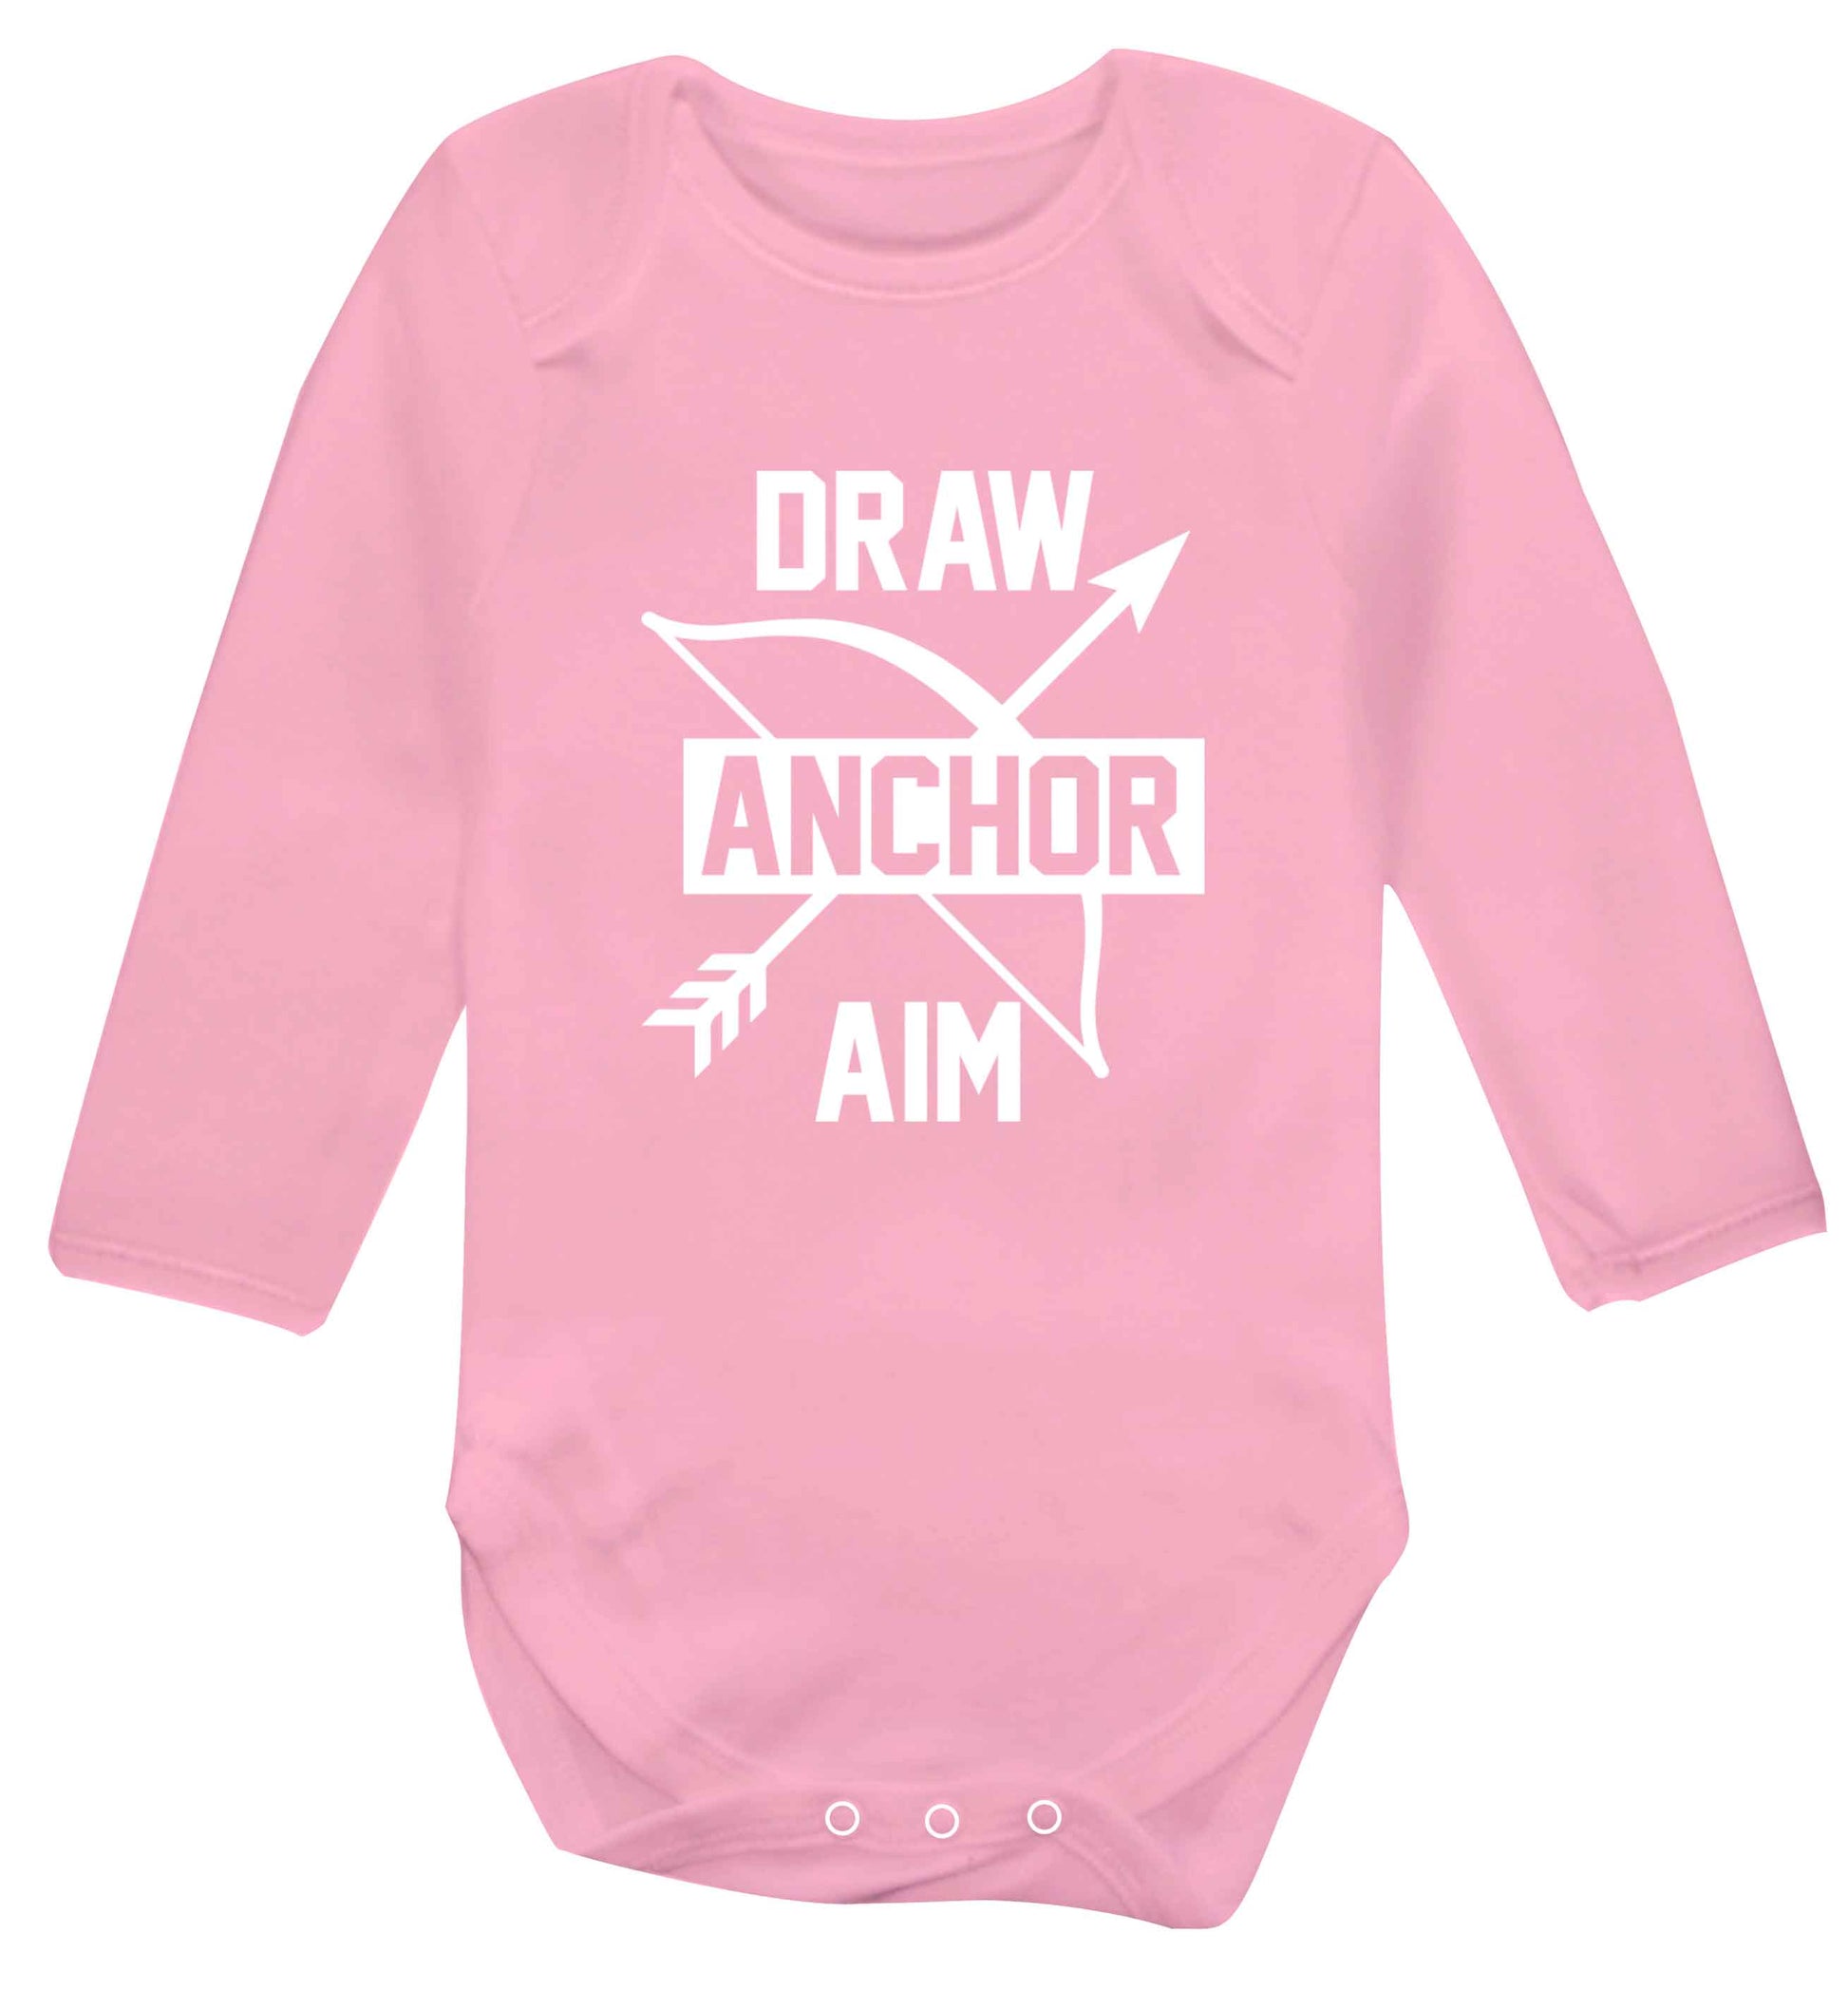 Draw anchor aim Baby Vest long sleeved pale pink 6-12 months